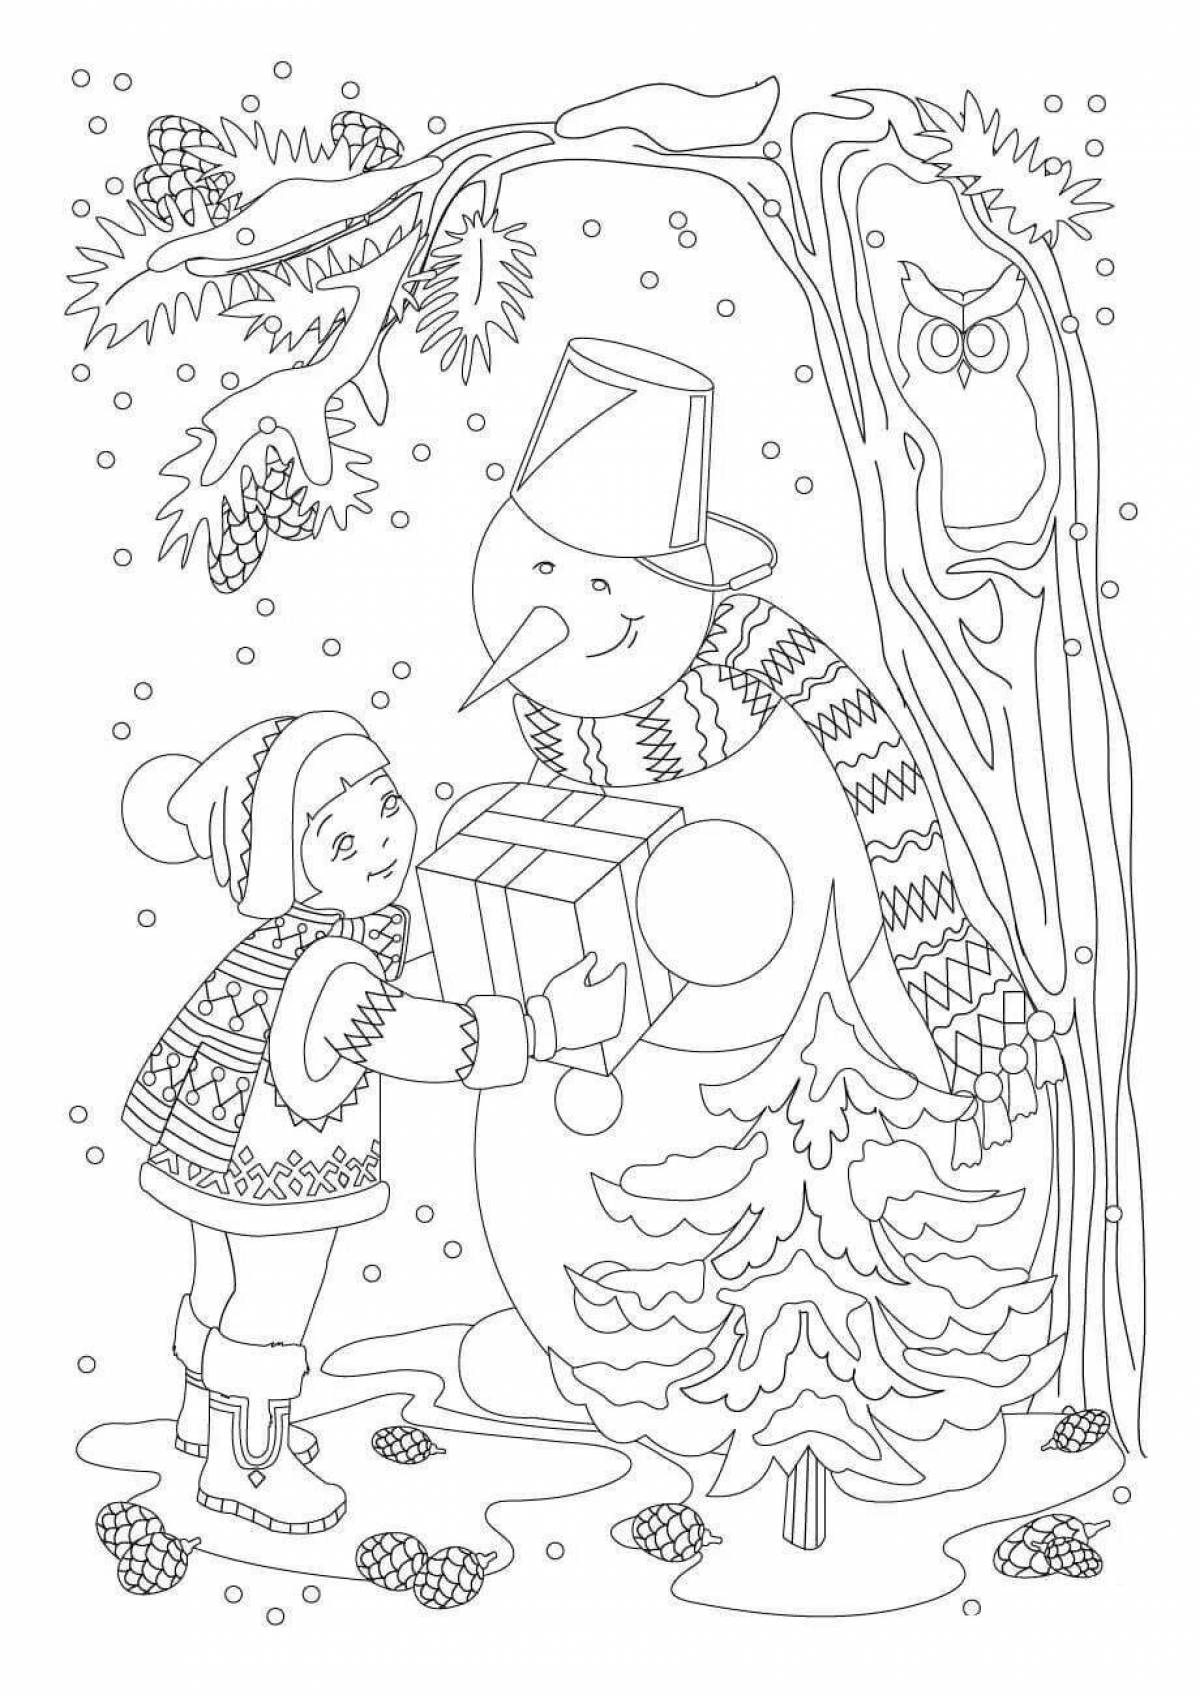 Coloring page wild snowman girl